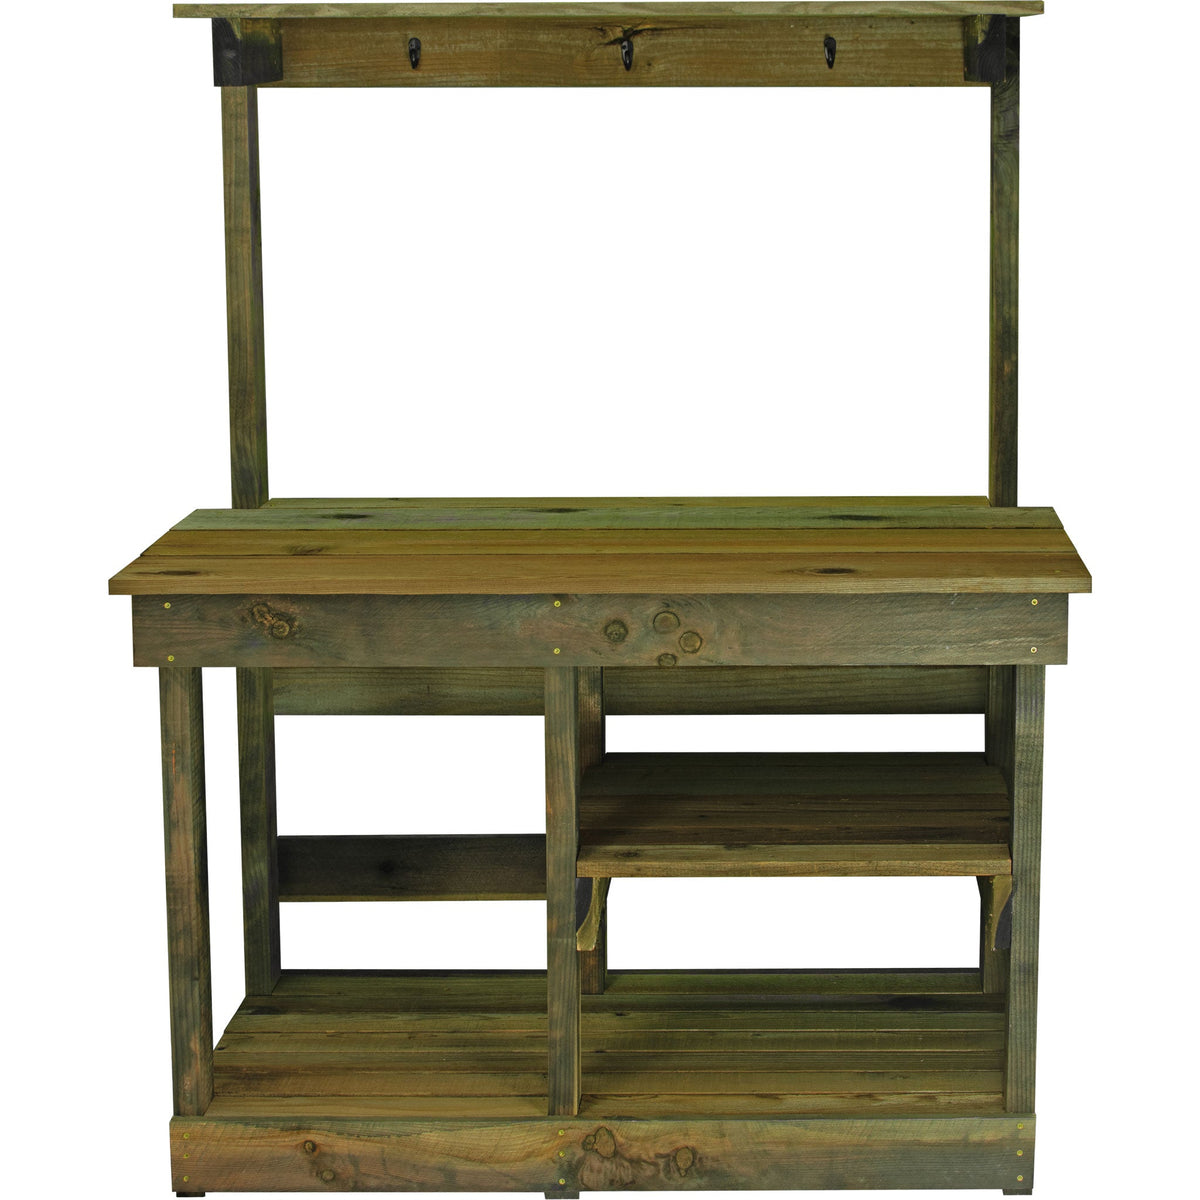 The Natural Redwood Frame Style of Lee Display's Rustic Gardening Workbench on sale now at leedisplay.com